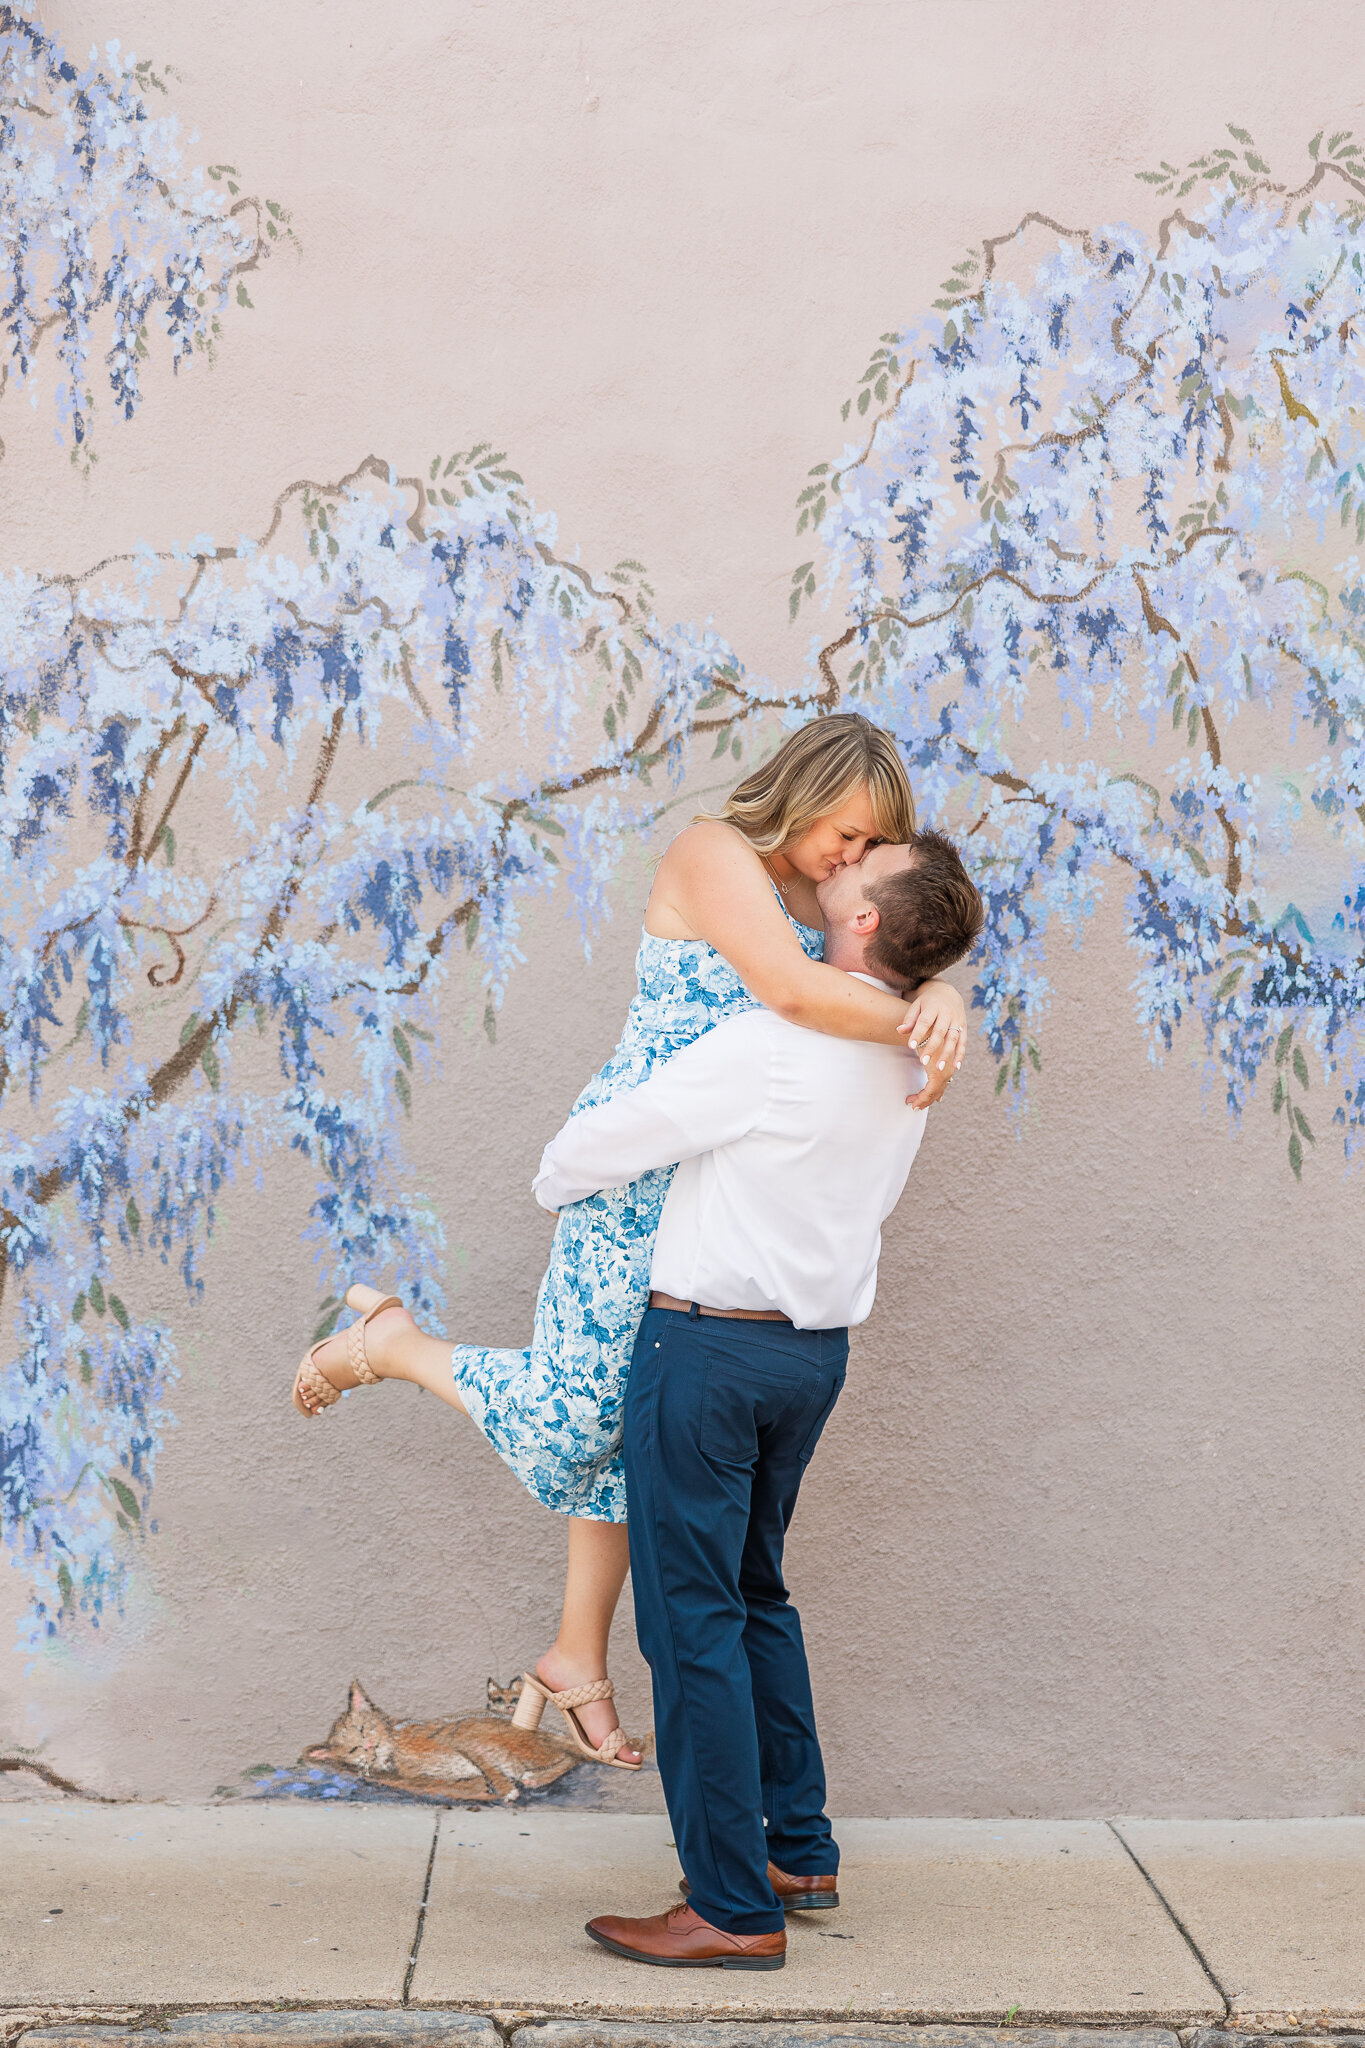 A man and woman kiss in front of a blue flower mural in Annapolis, MD